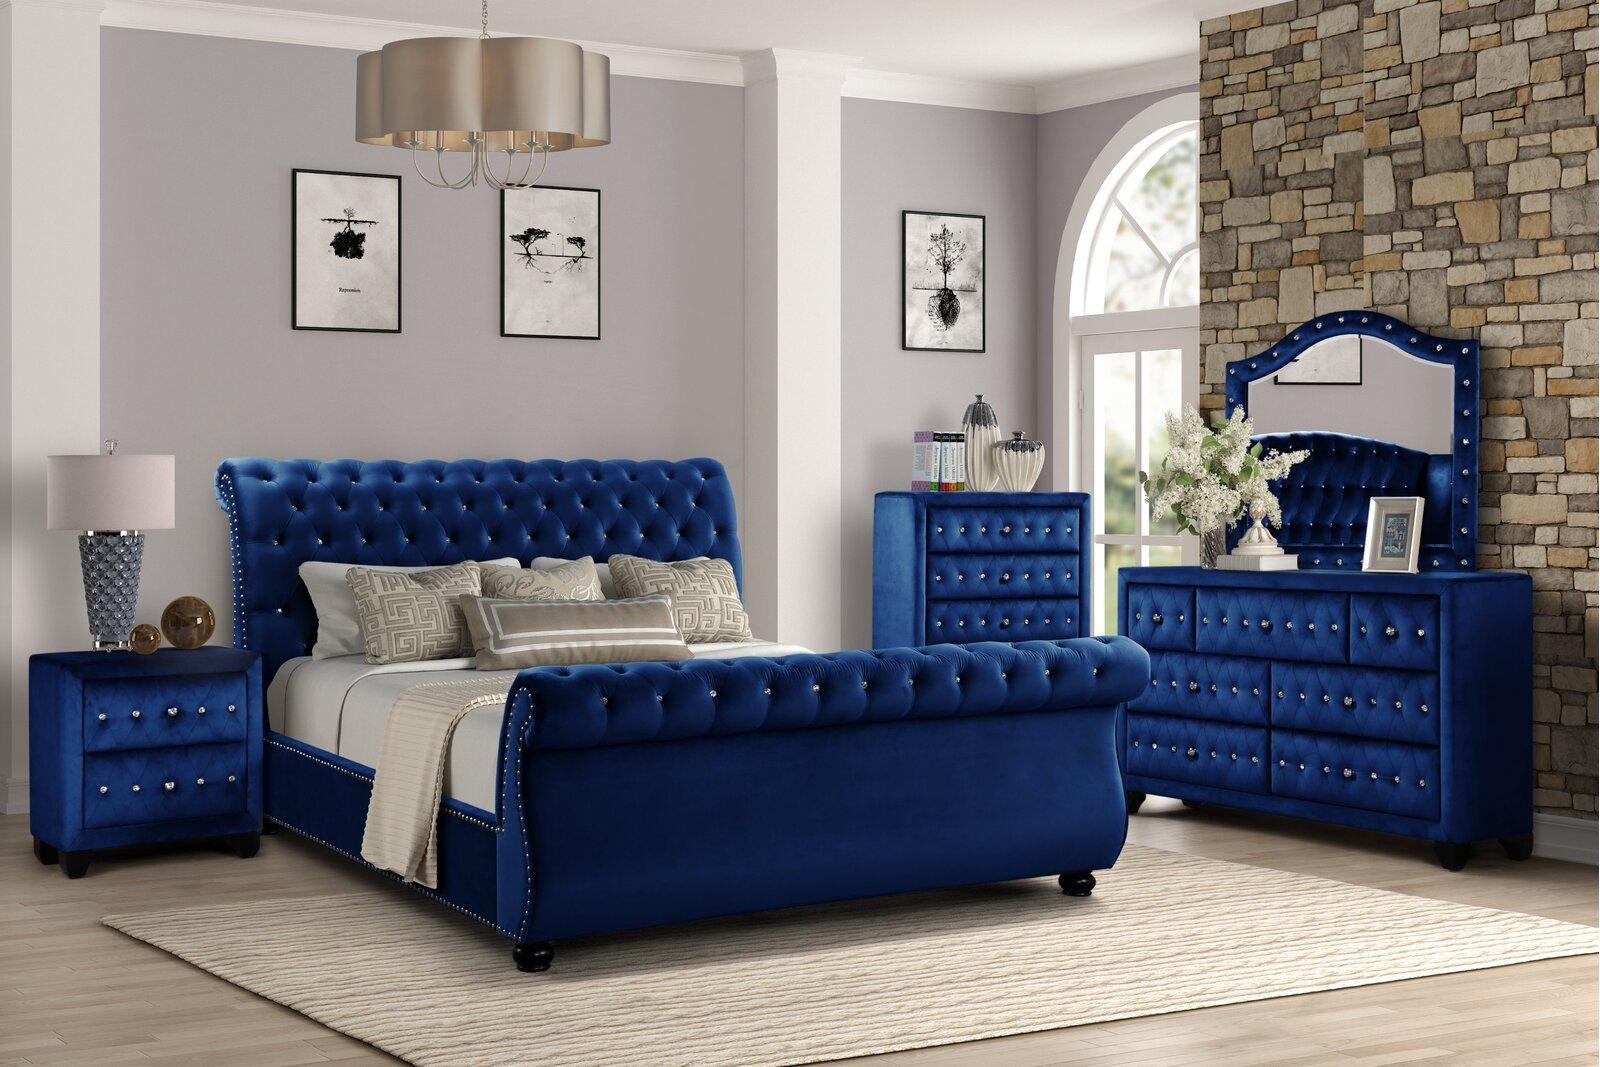 Contemporary, Modern Sleight Bedroom Set KENDALL GHF-808857957696-Set-5 in Navy 